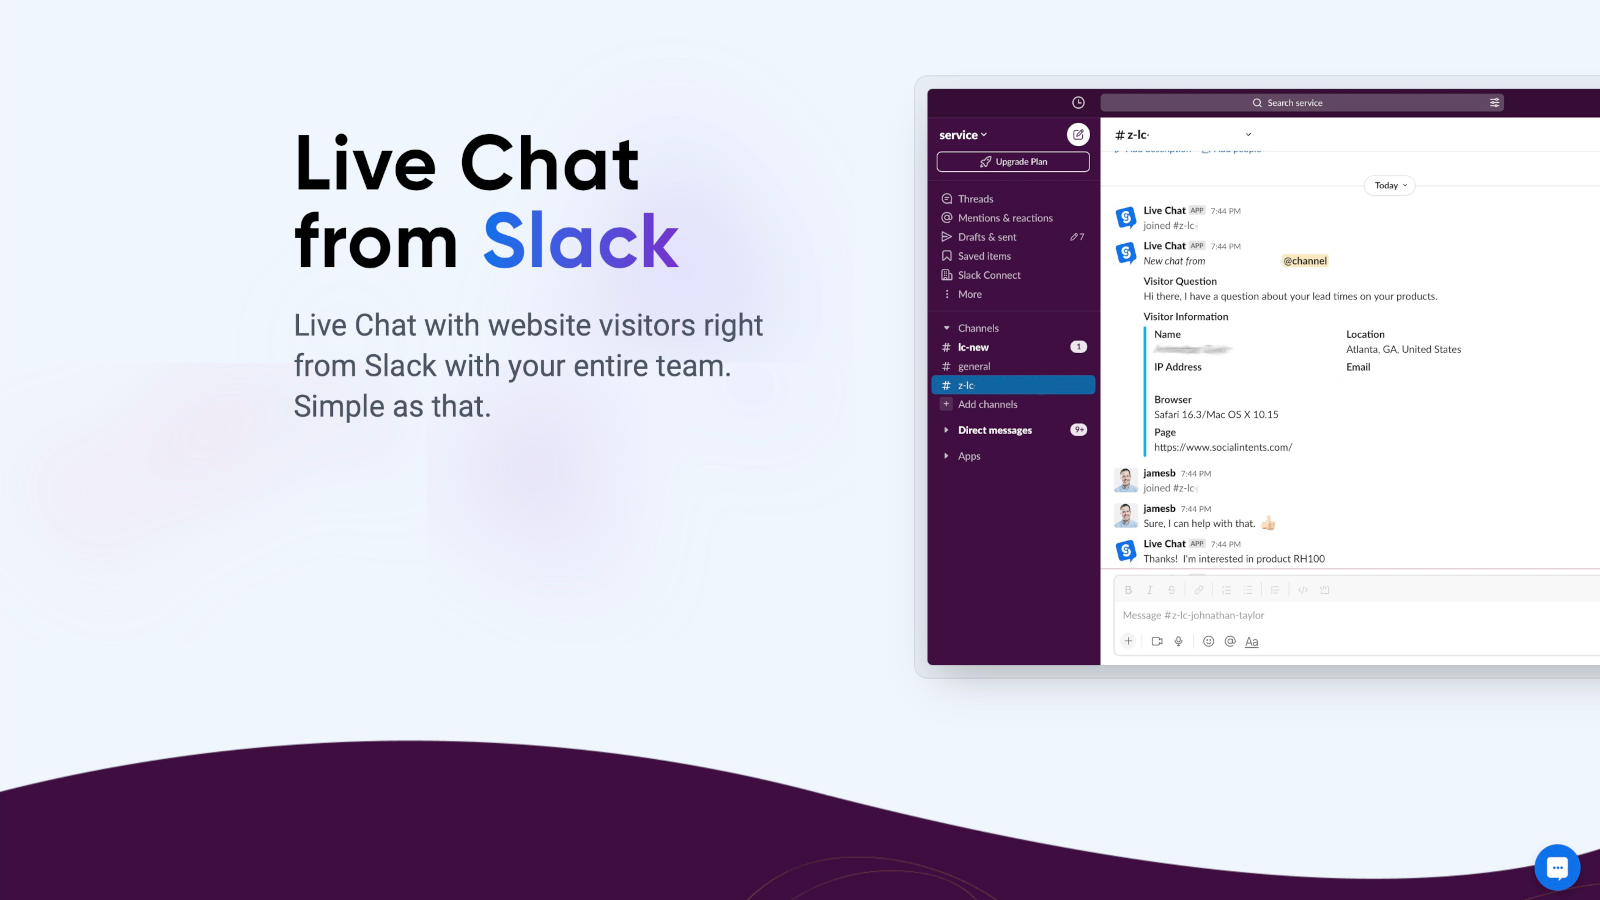 Live Chat with visitors from Slack